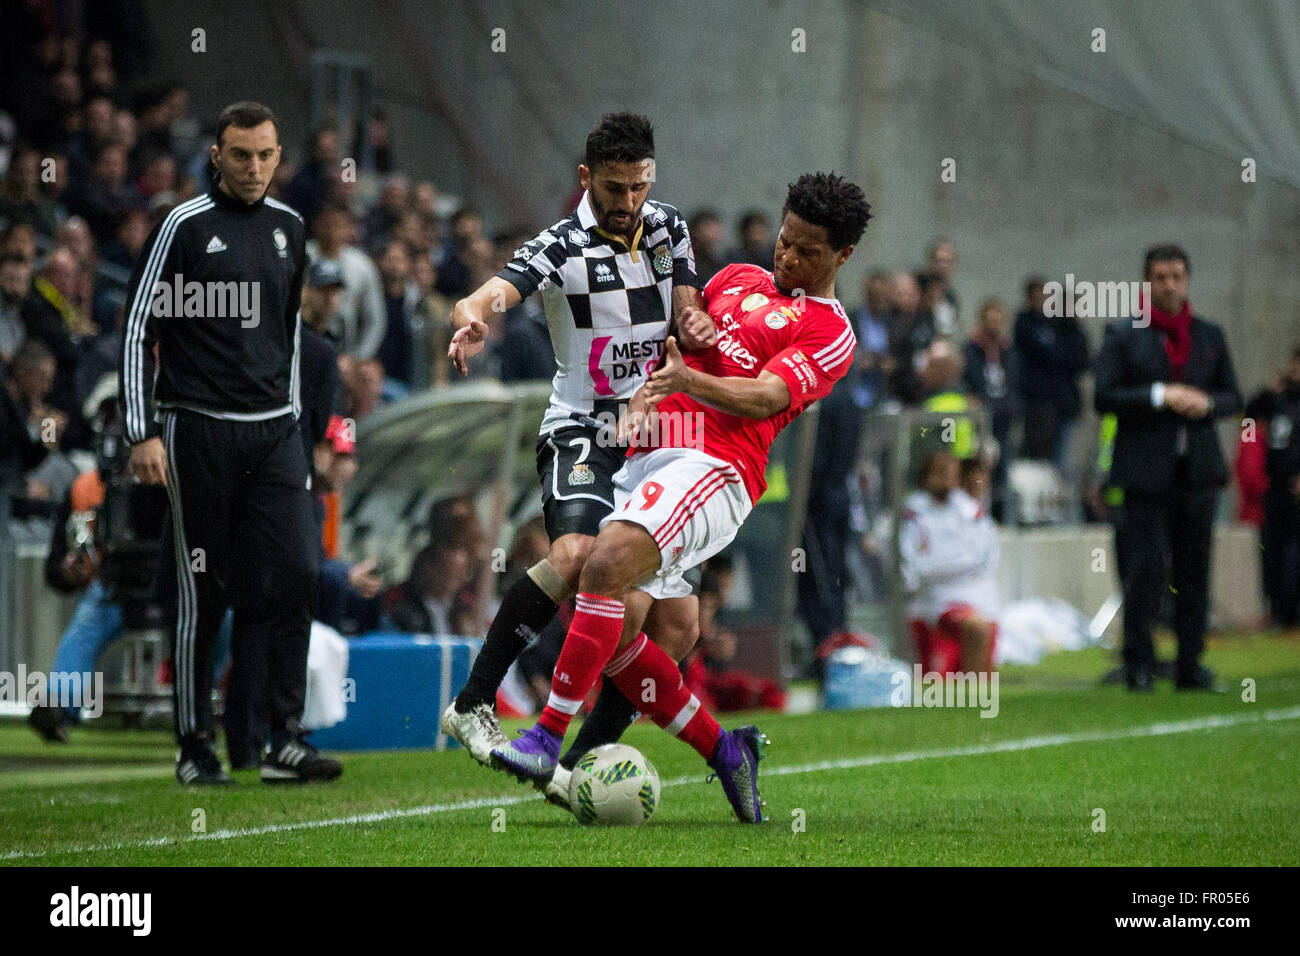 Porto, Portugal. 20th March, 2016. SL Benfica player in action during first league match between Boavista FC and SL Benfica at Boavista Stadium in Porto, on March 20, 2016. Credit:  Diogo Baptista/Alamy Live News Stock Photo